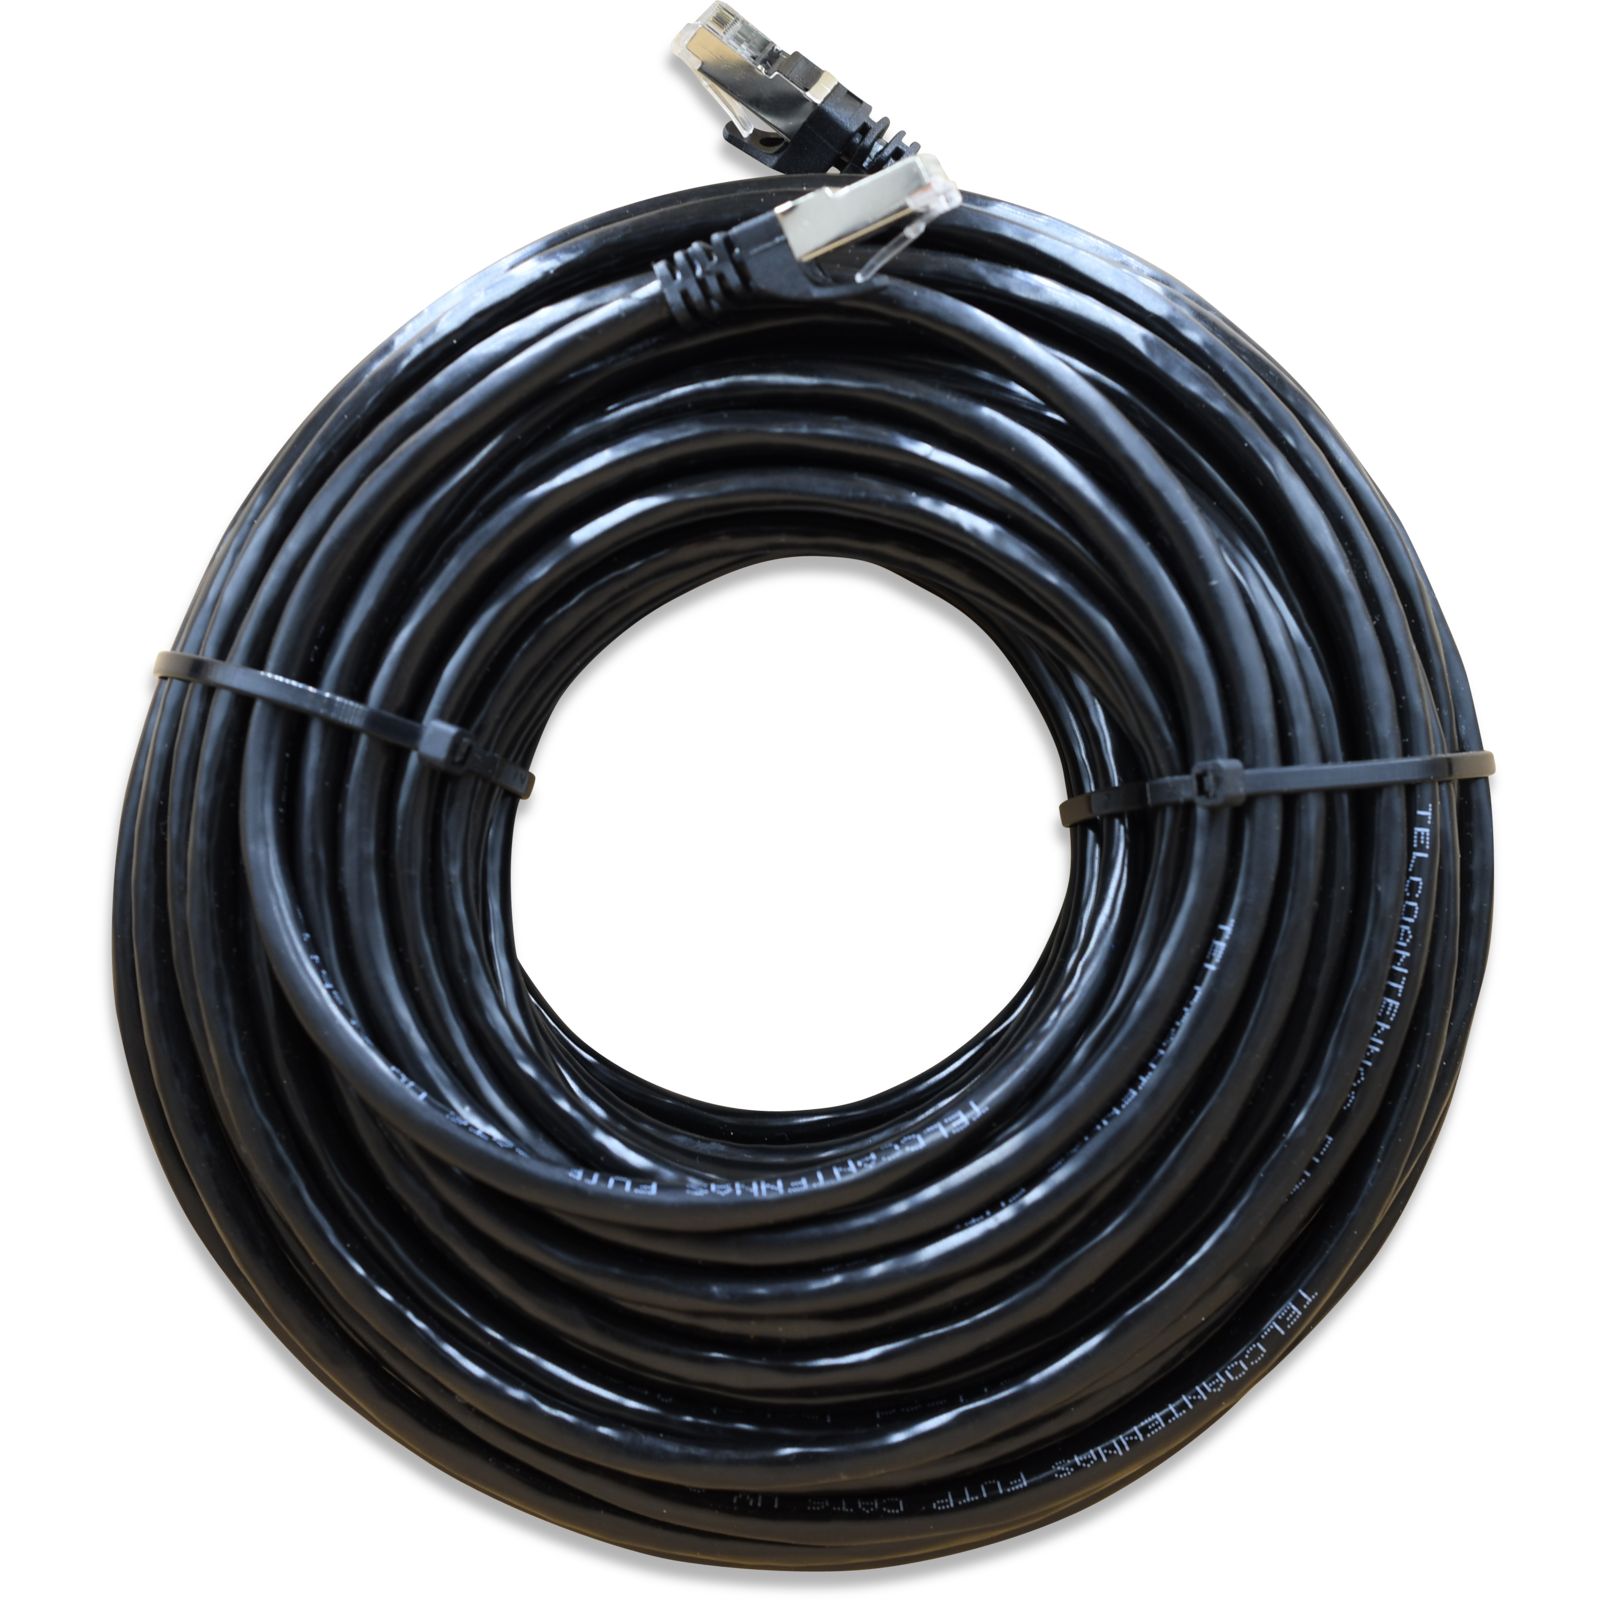 10 Amazing Bulk Ethernet Cable for 2023